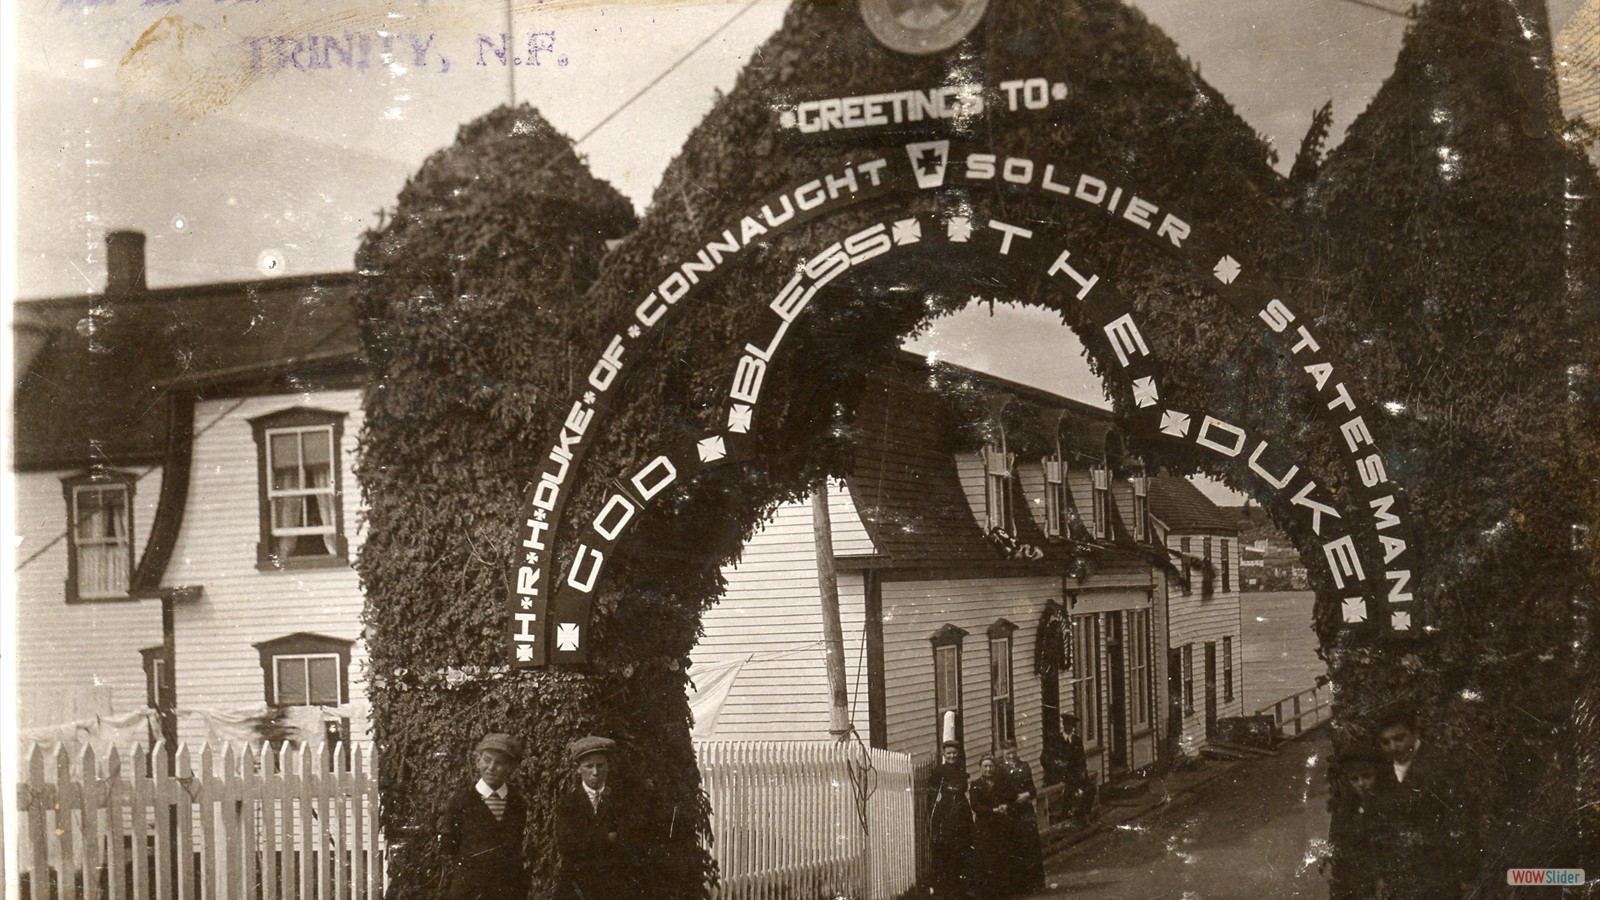 Bough Arch erected in celebration of His Royal Highness Duke of Connaught visit in 1914. He however had to cancel his visit as he was called back to Europe as the First World War was about to break out.